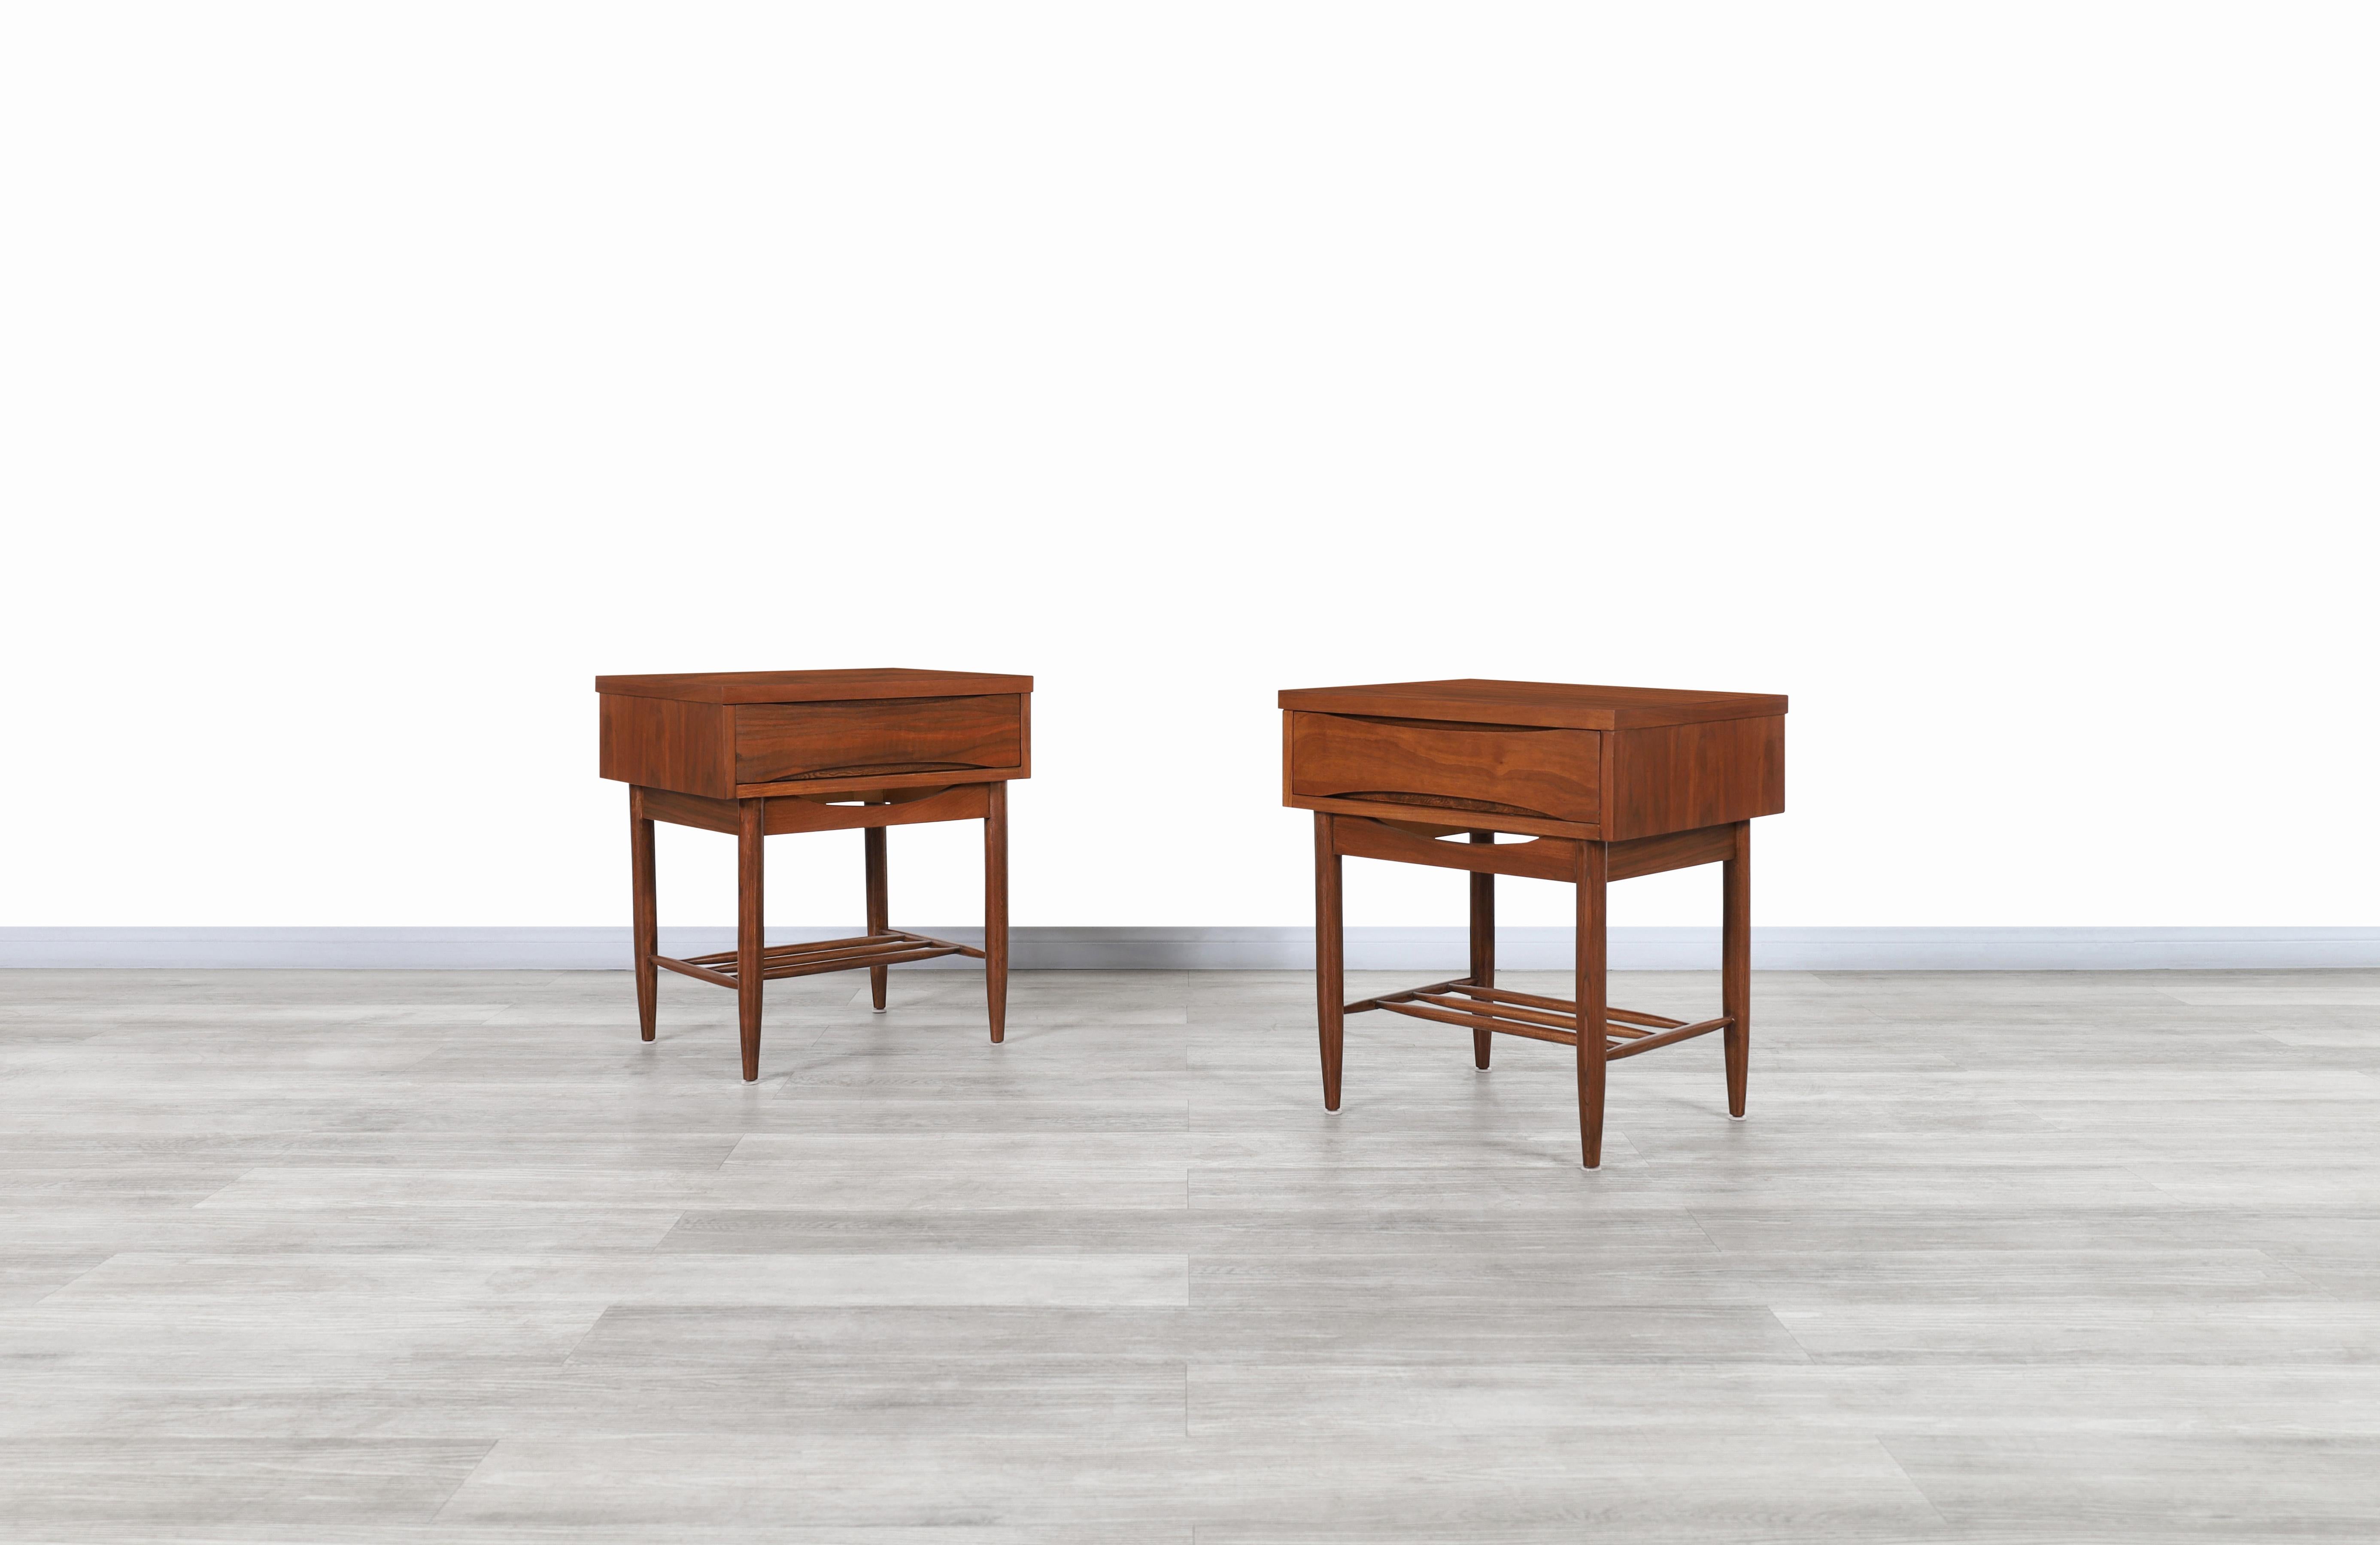 Fabulous Mid-Century Modern walnut nightstands designed by Broyhill and manufactured by United States, circa 1960s. These nightstands have been constructed from the highest quality walnut wood and feature a Minimalist yet highly functional design.